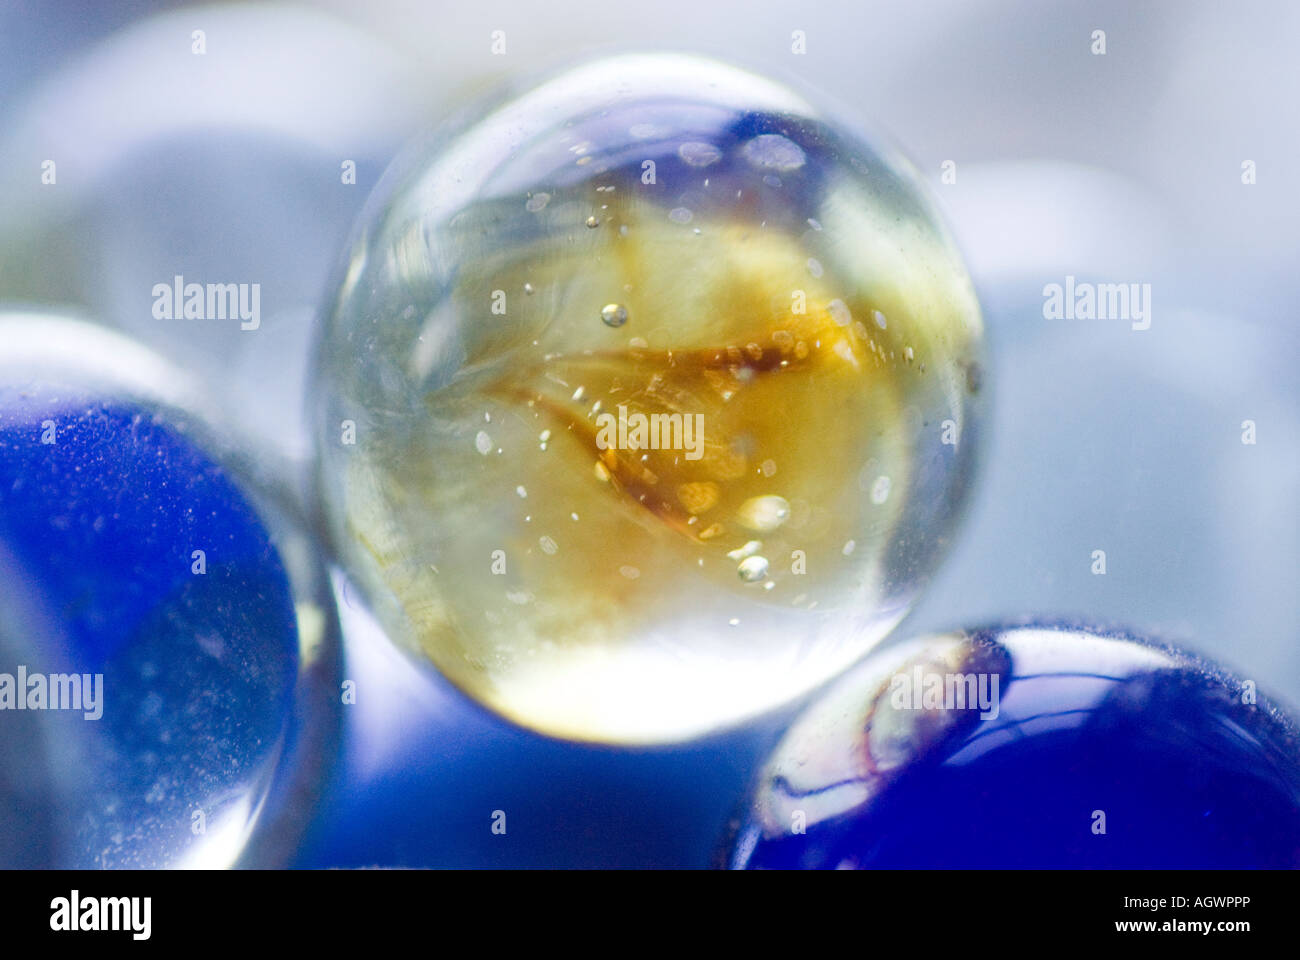 Close up of marbles. Stock Photo